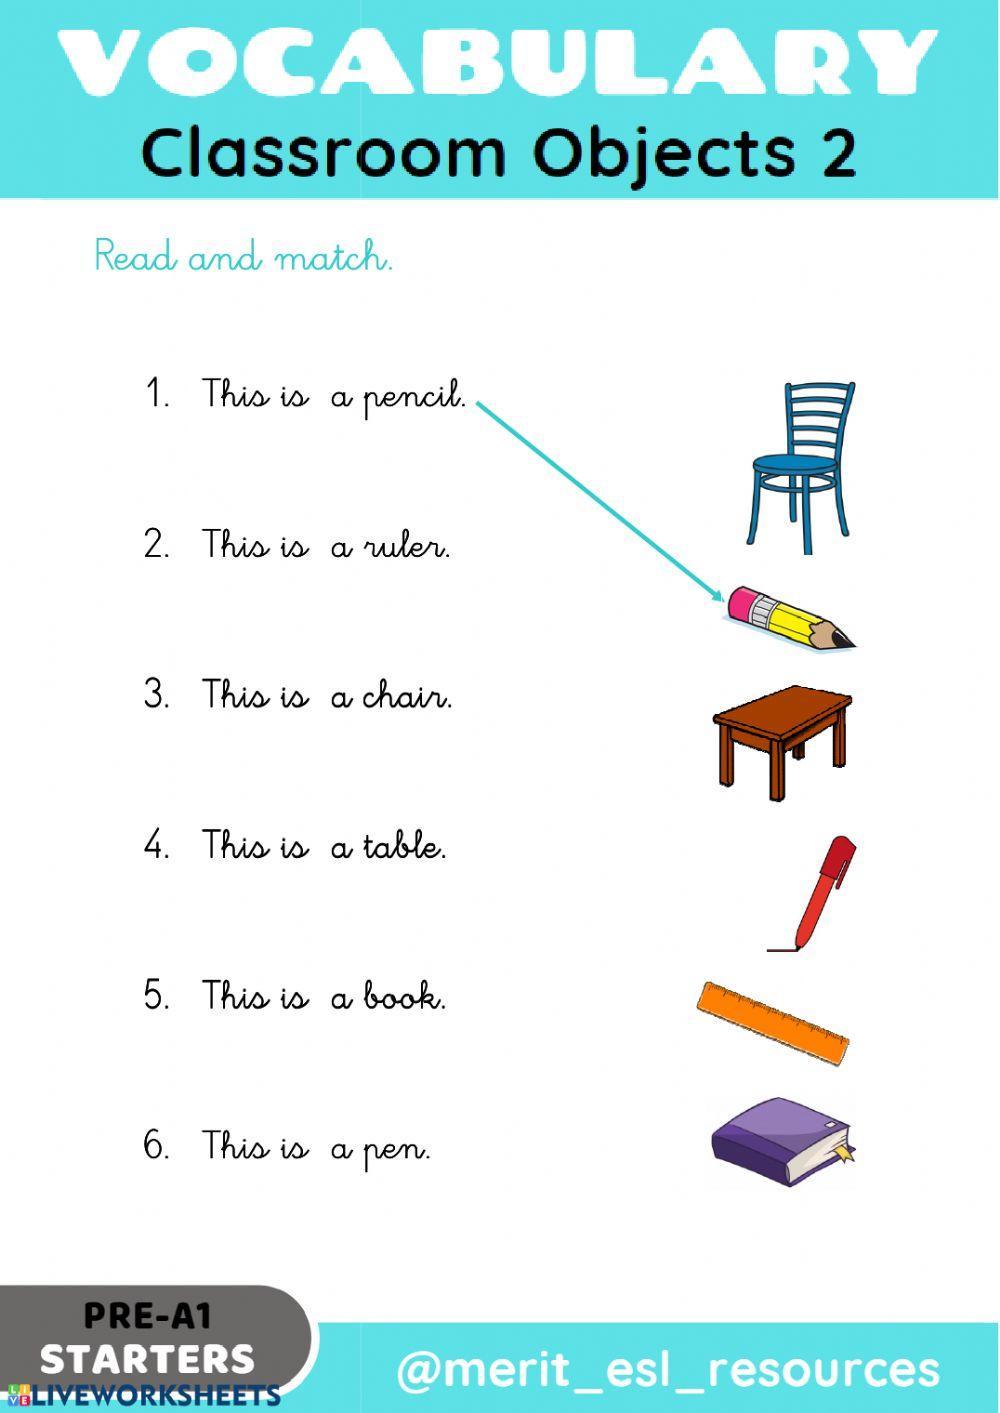 School Objects - Read and match